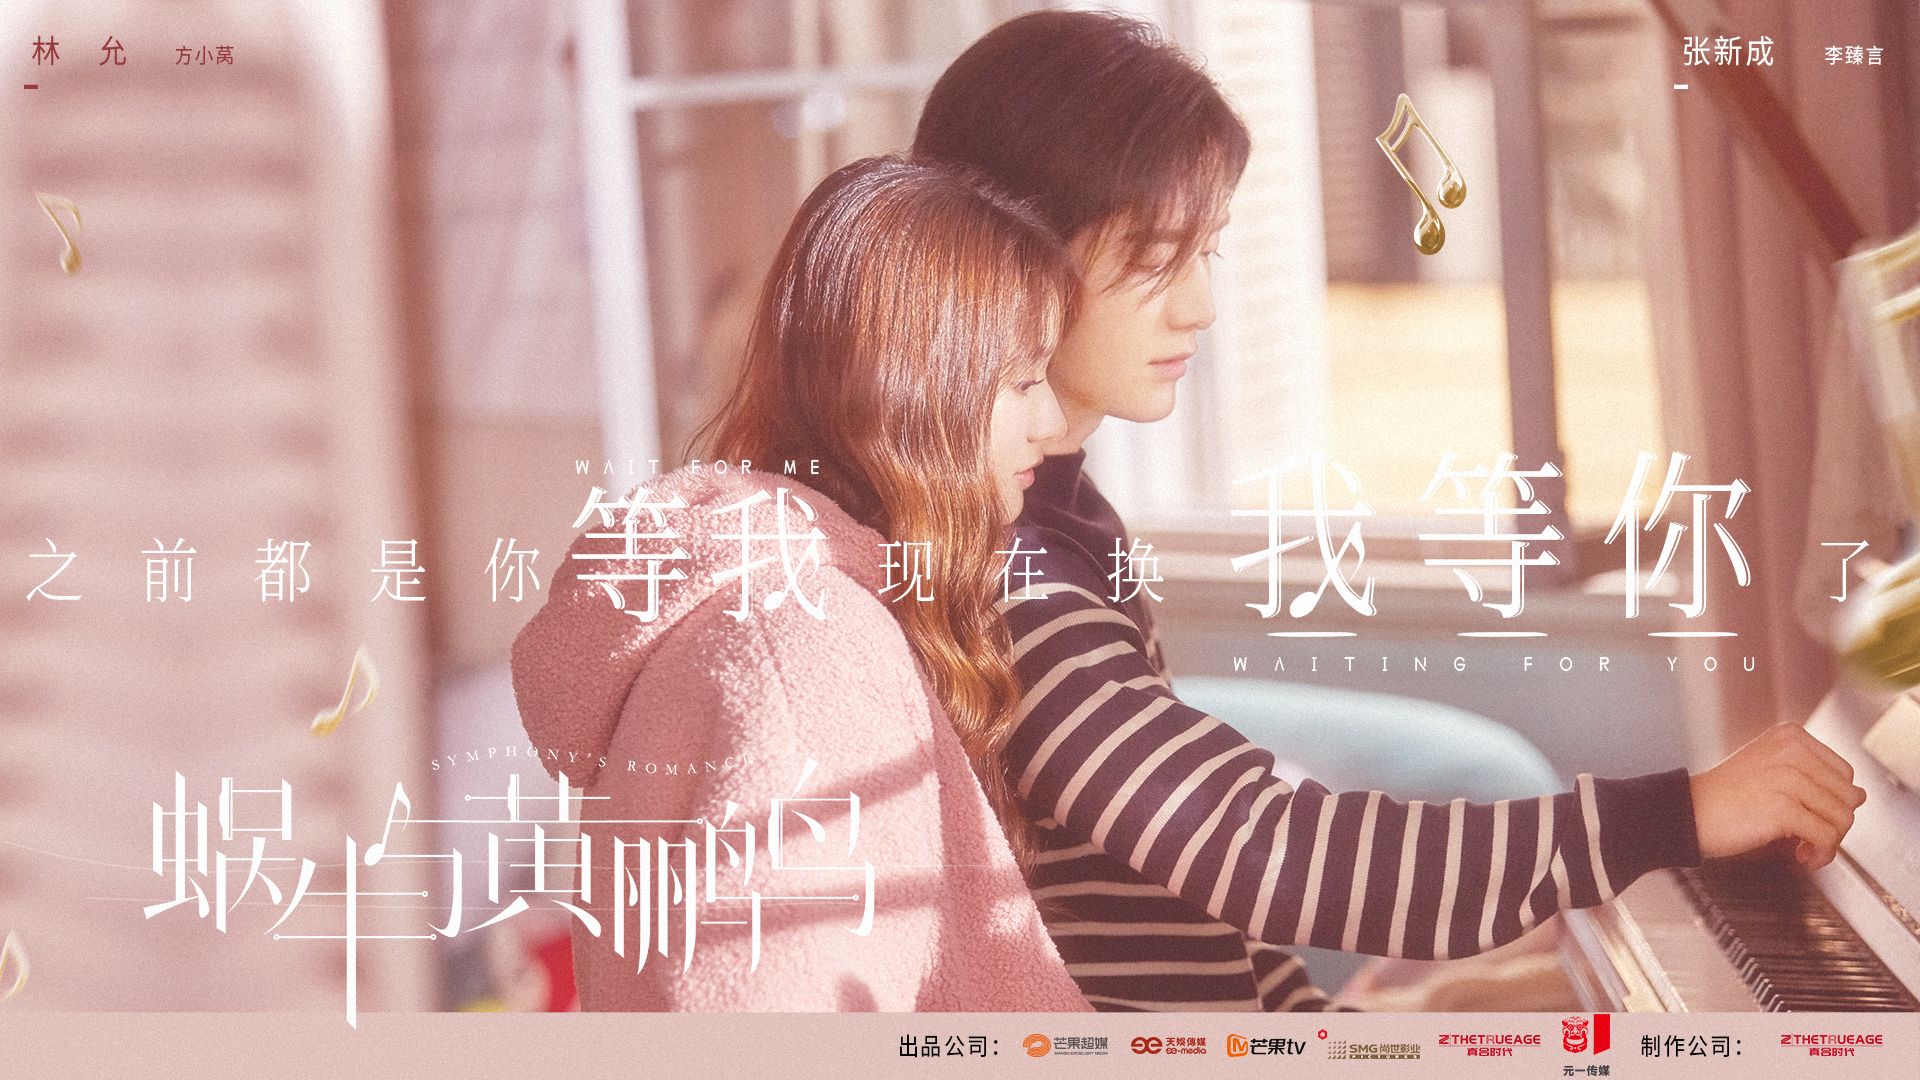 Jelly Lin And Zhang Xin Cheng Pair Up For “Nodame Cantabile” Drama Remake. Hotpot TV. Watch Chinese, Taiwanese, and HK TV Shows for Free